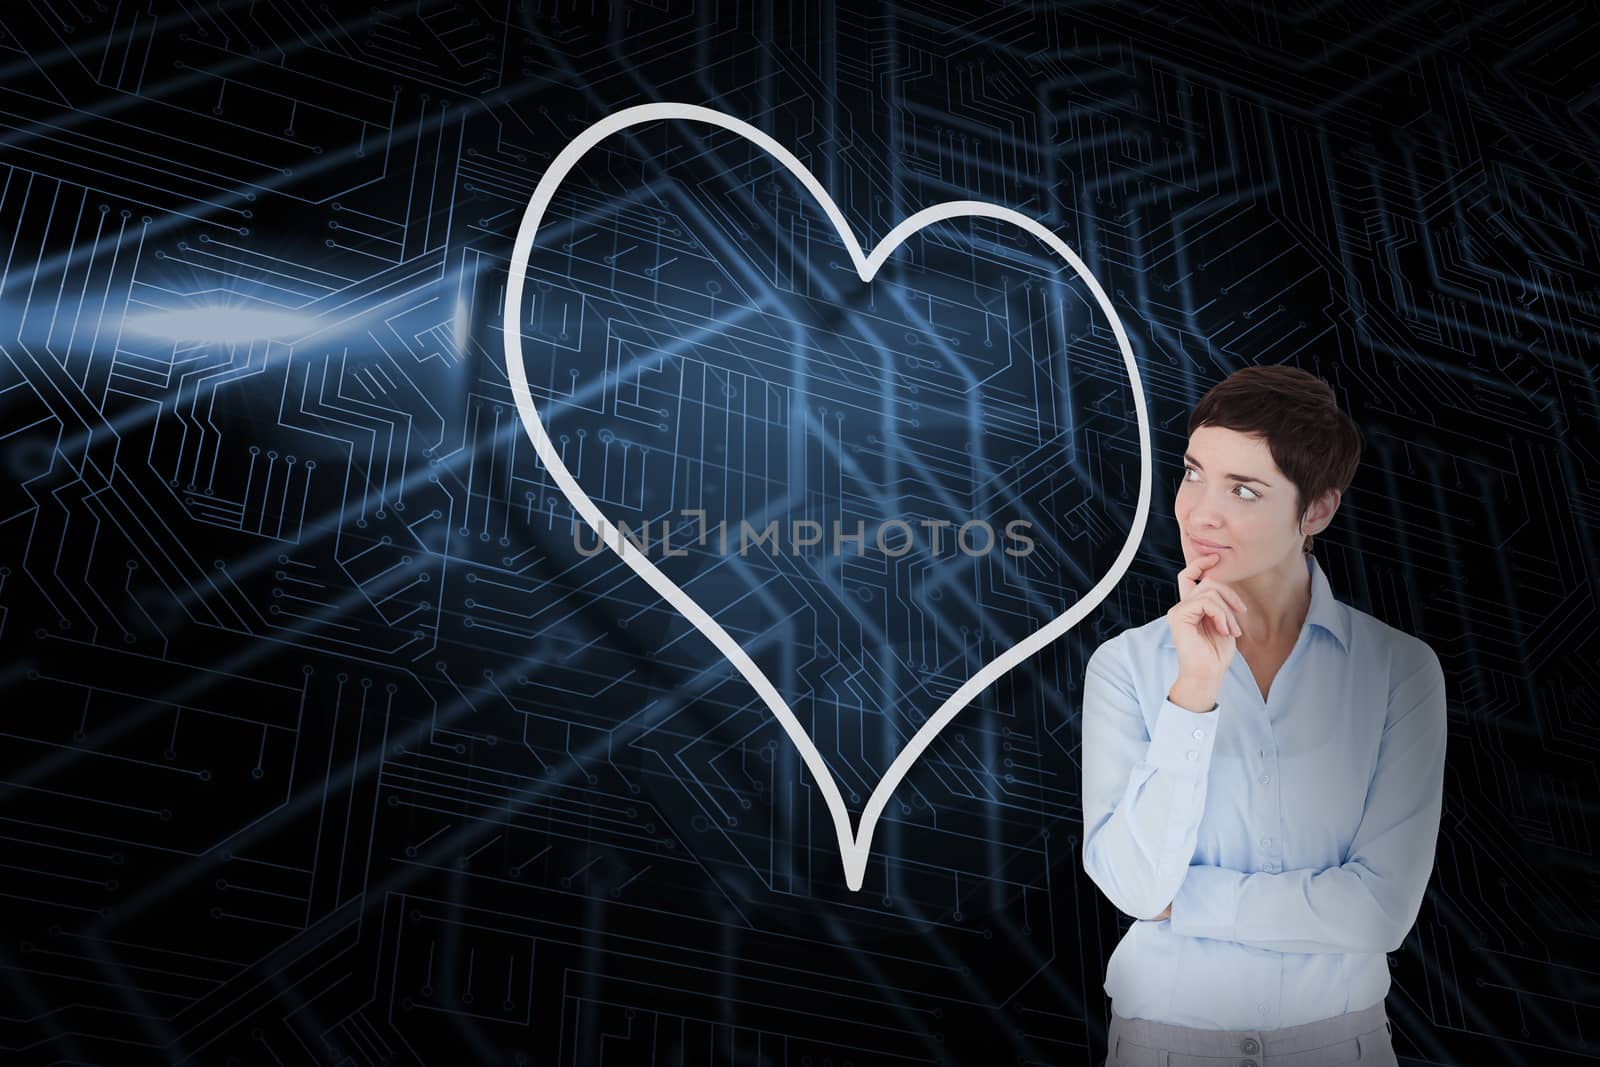 Composite image of heart and thinking businesswoman against futuristic black and blue background